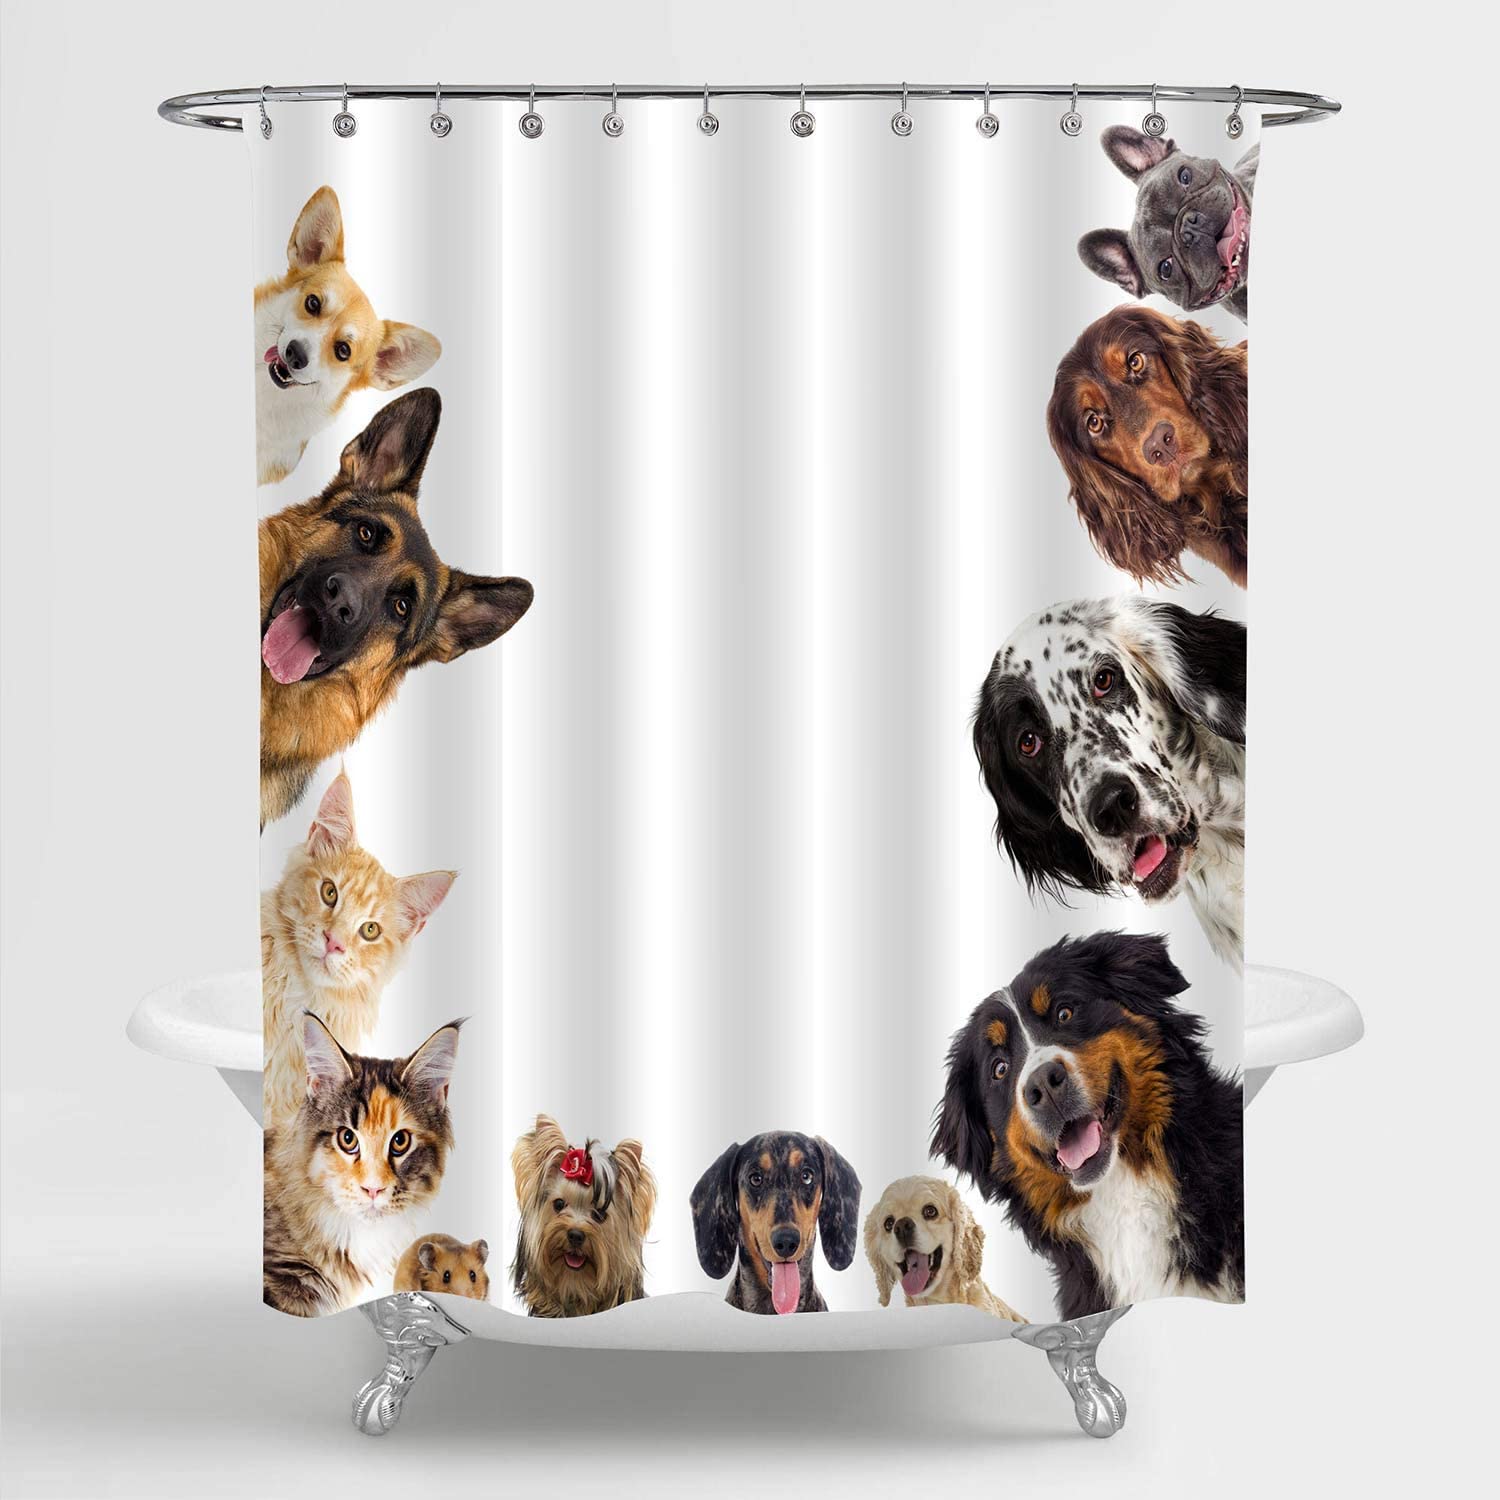 Cats and Dogs Shower Curtain for Pet Bathroom Decor, Funny Group of Dogs and Cats Peeking Bathroom Accessories with 12 hooks